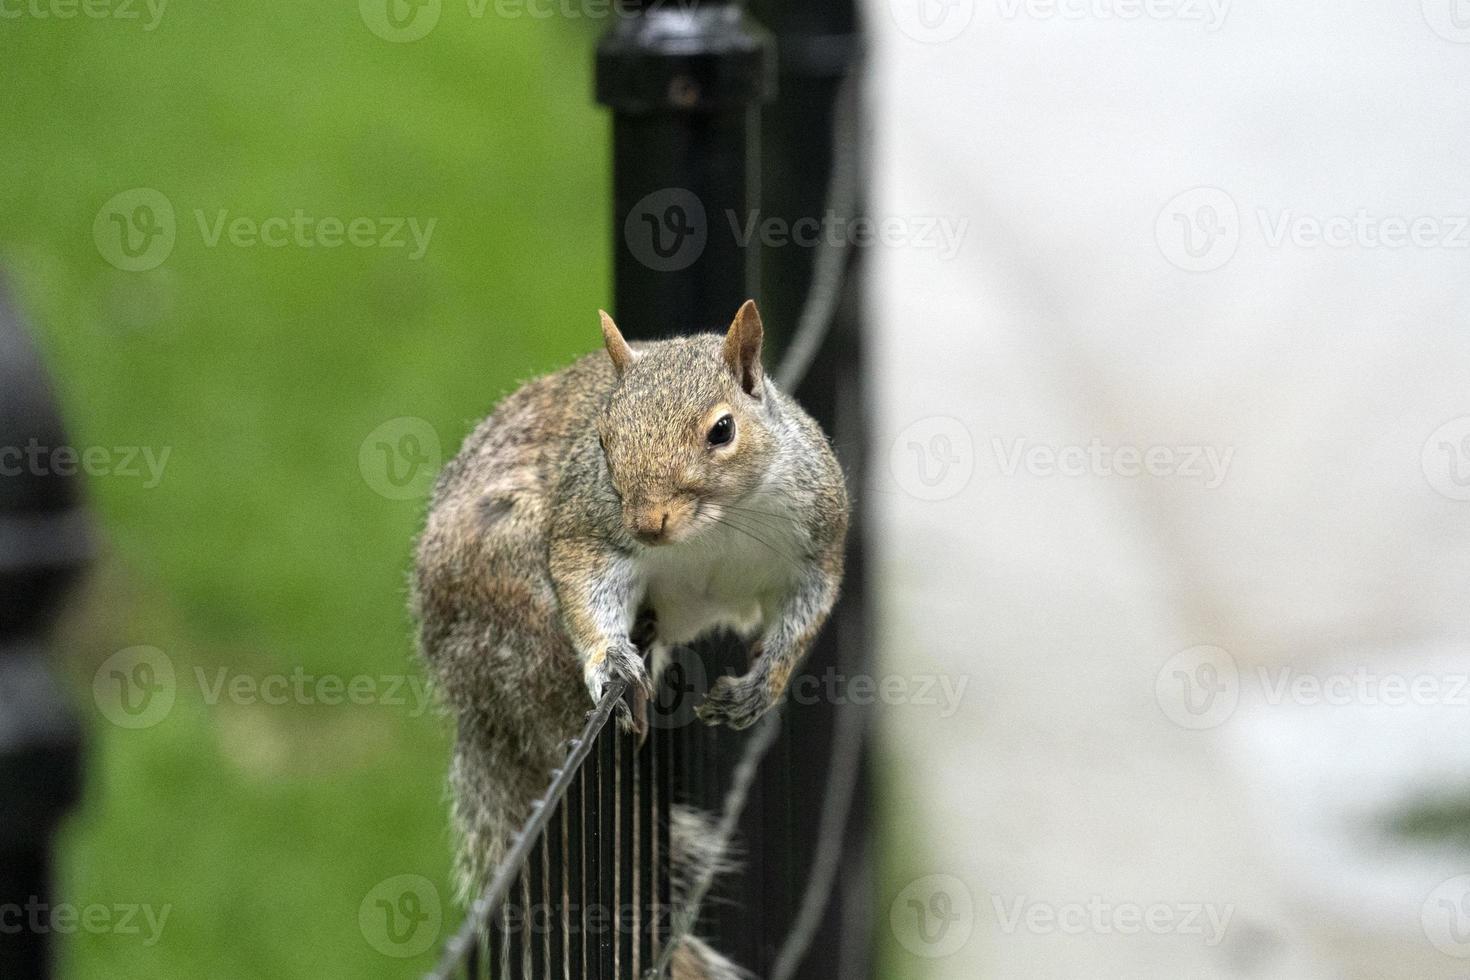 central parkgrey squirrel on the green portrait look at you photo